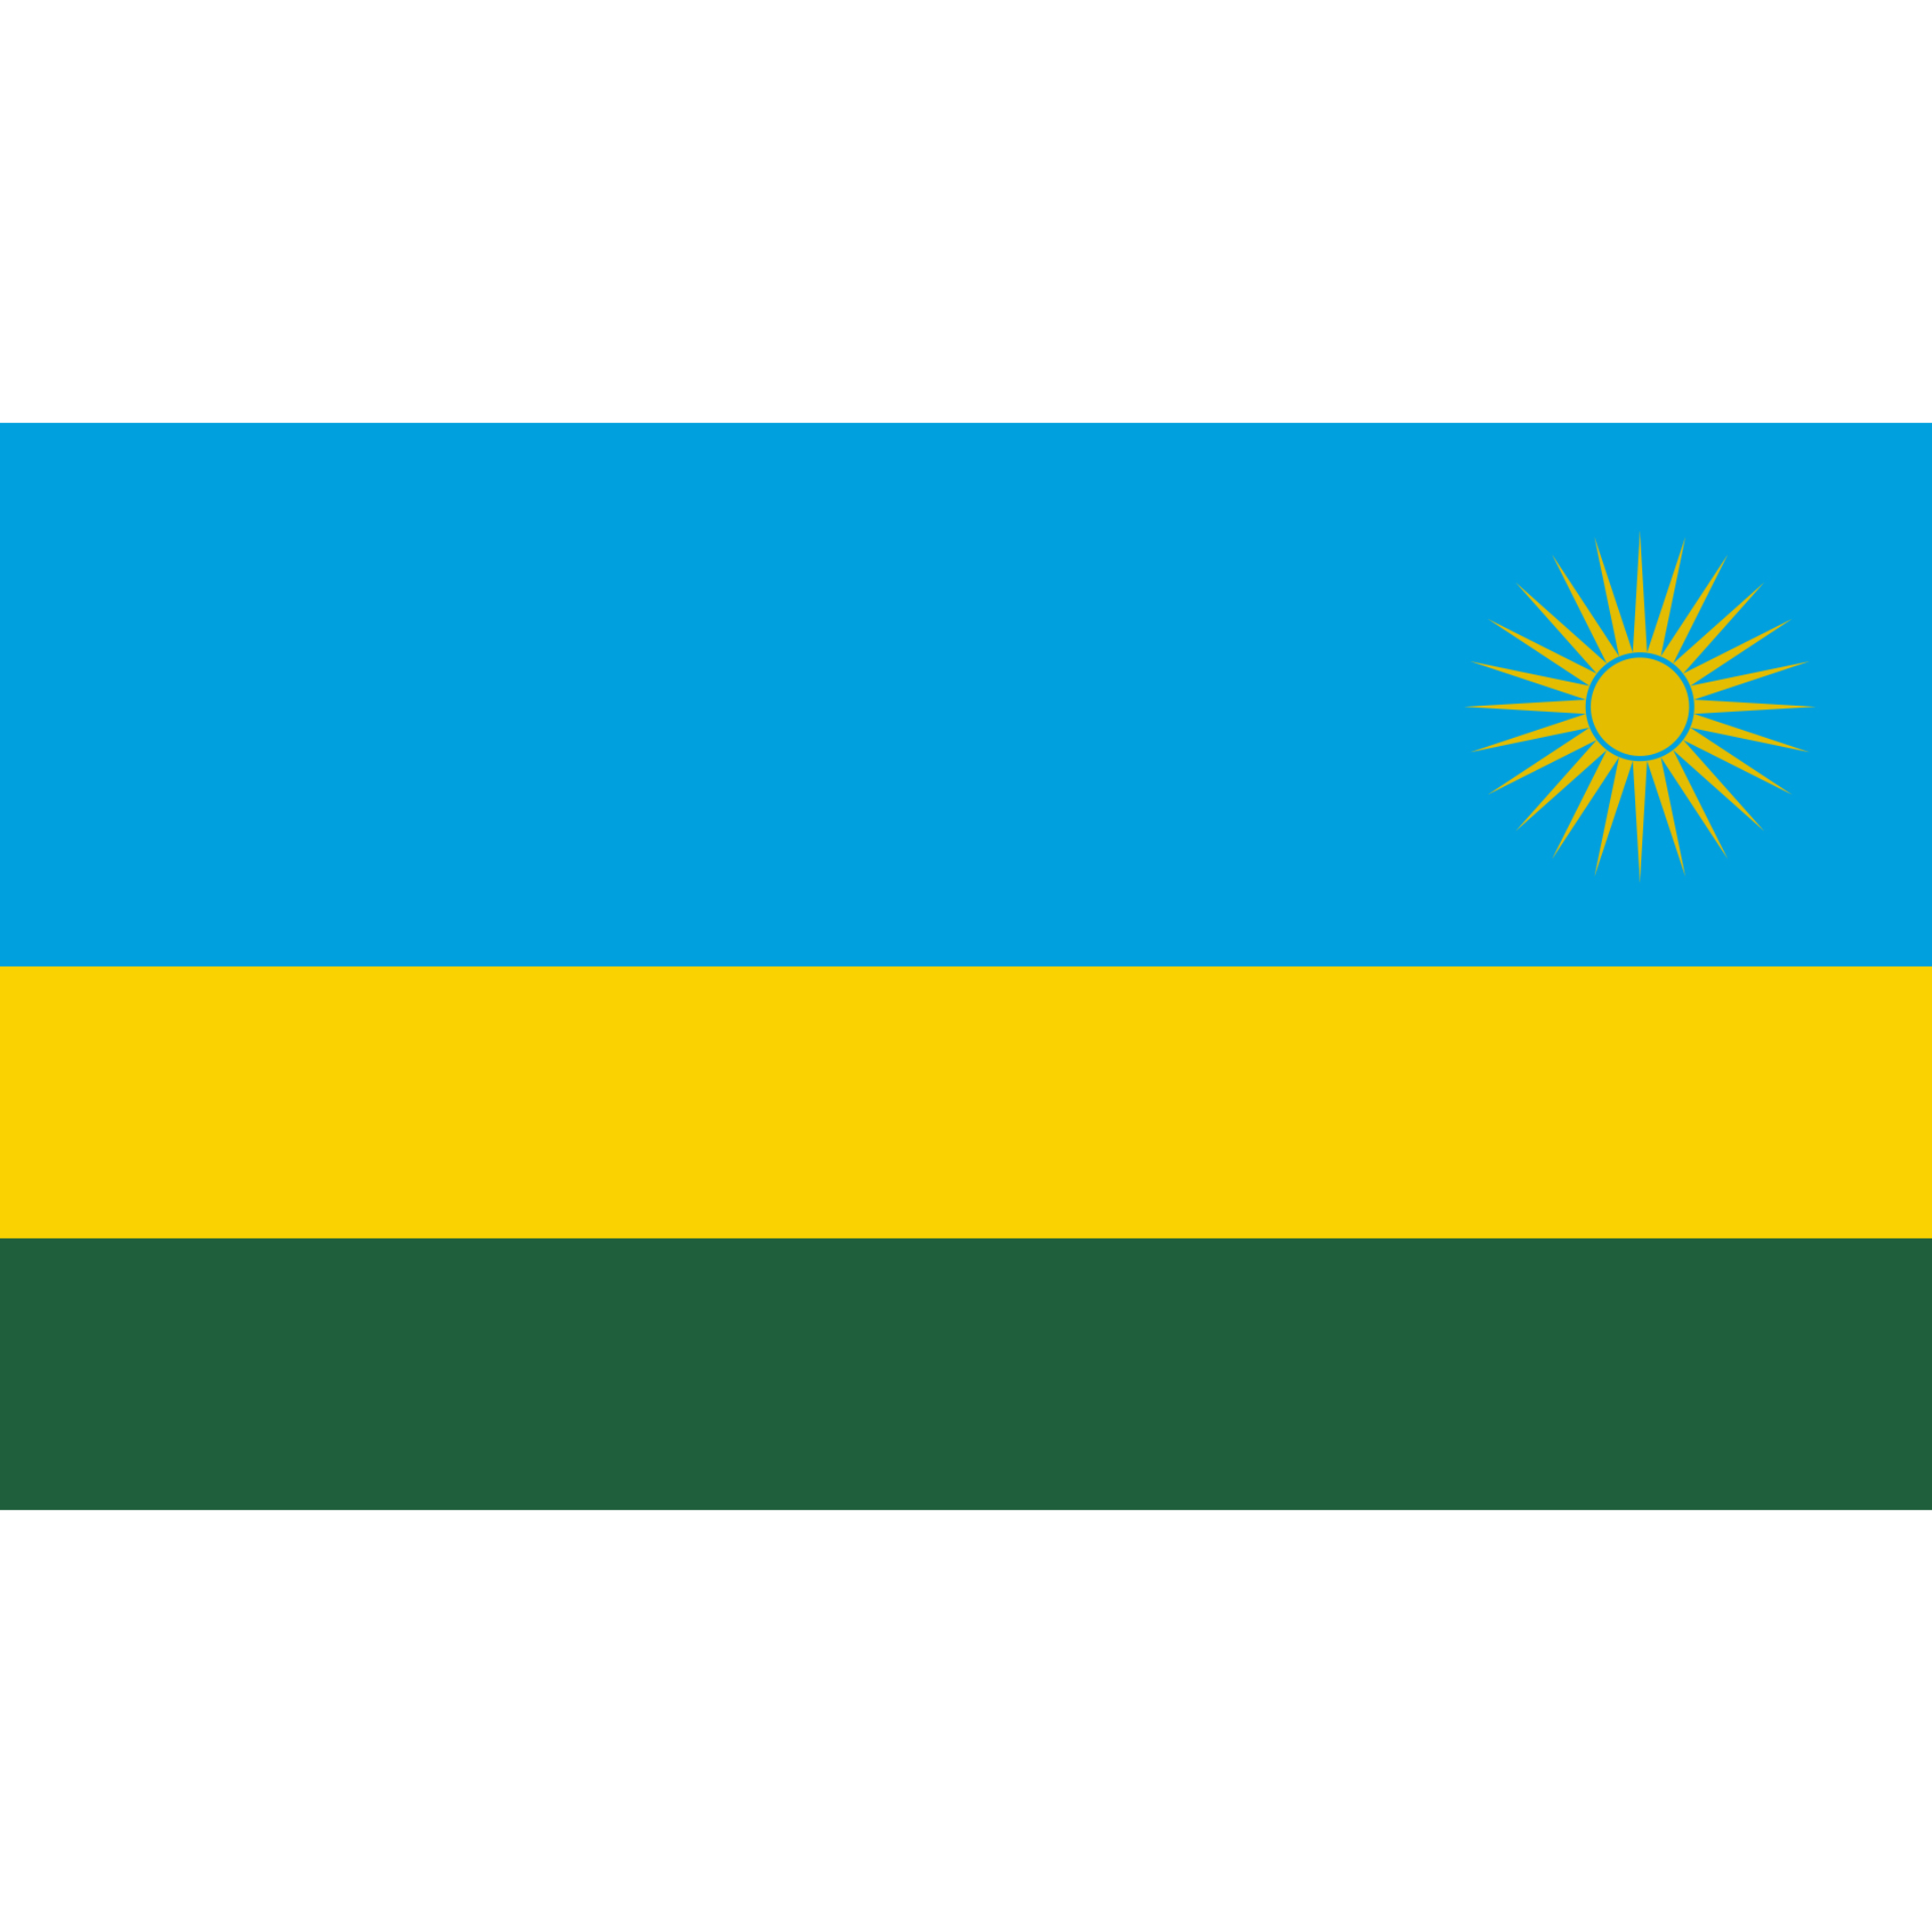 The Rwandan flag has 3 horizontal bands in blue (double width), yellow and green with a yellow sun in the upper left corner.